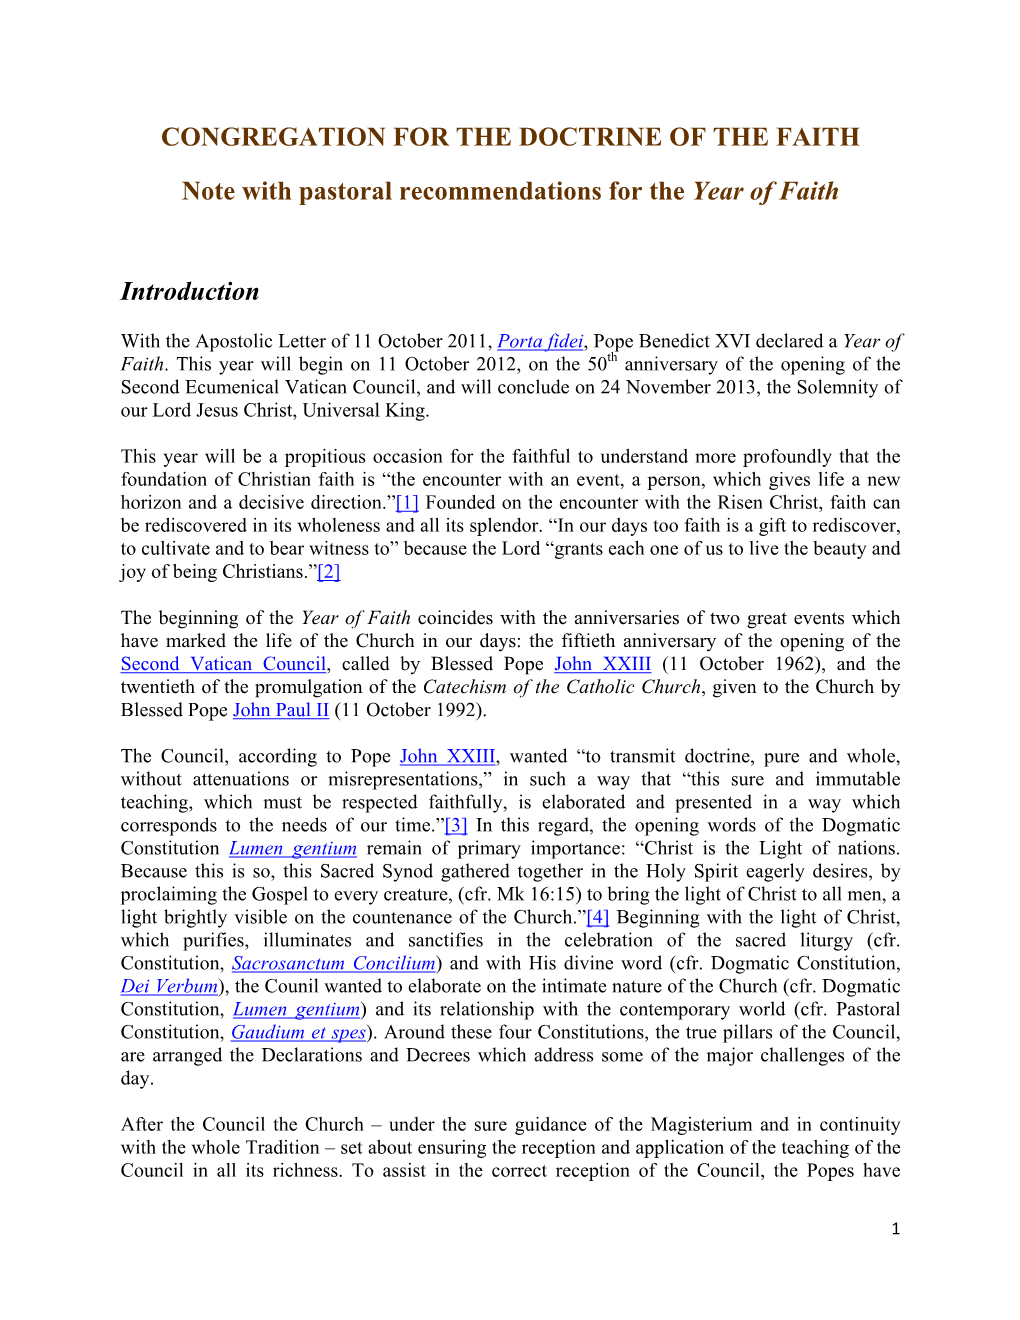 Congregation for the Doctrine of the Faith